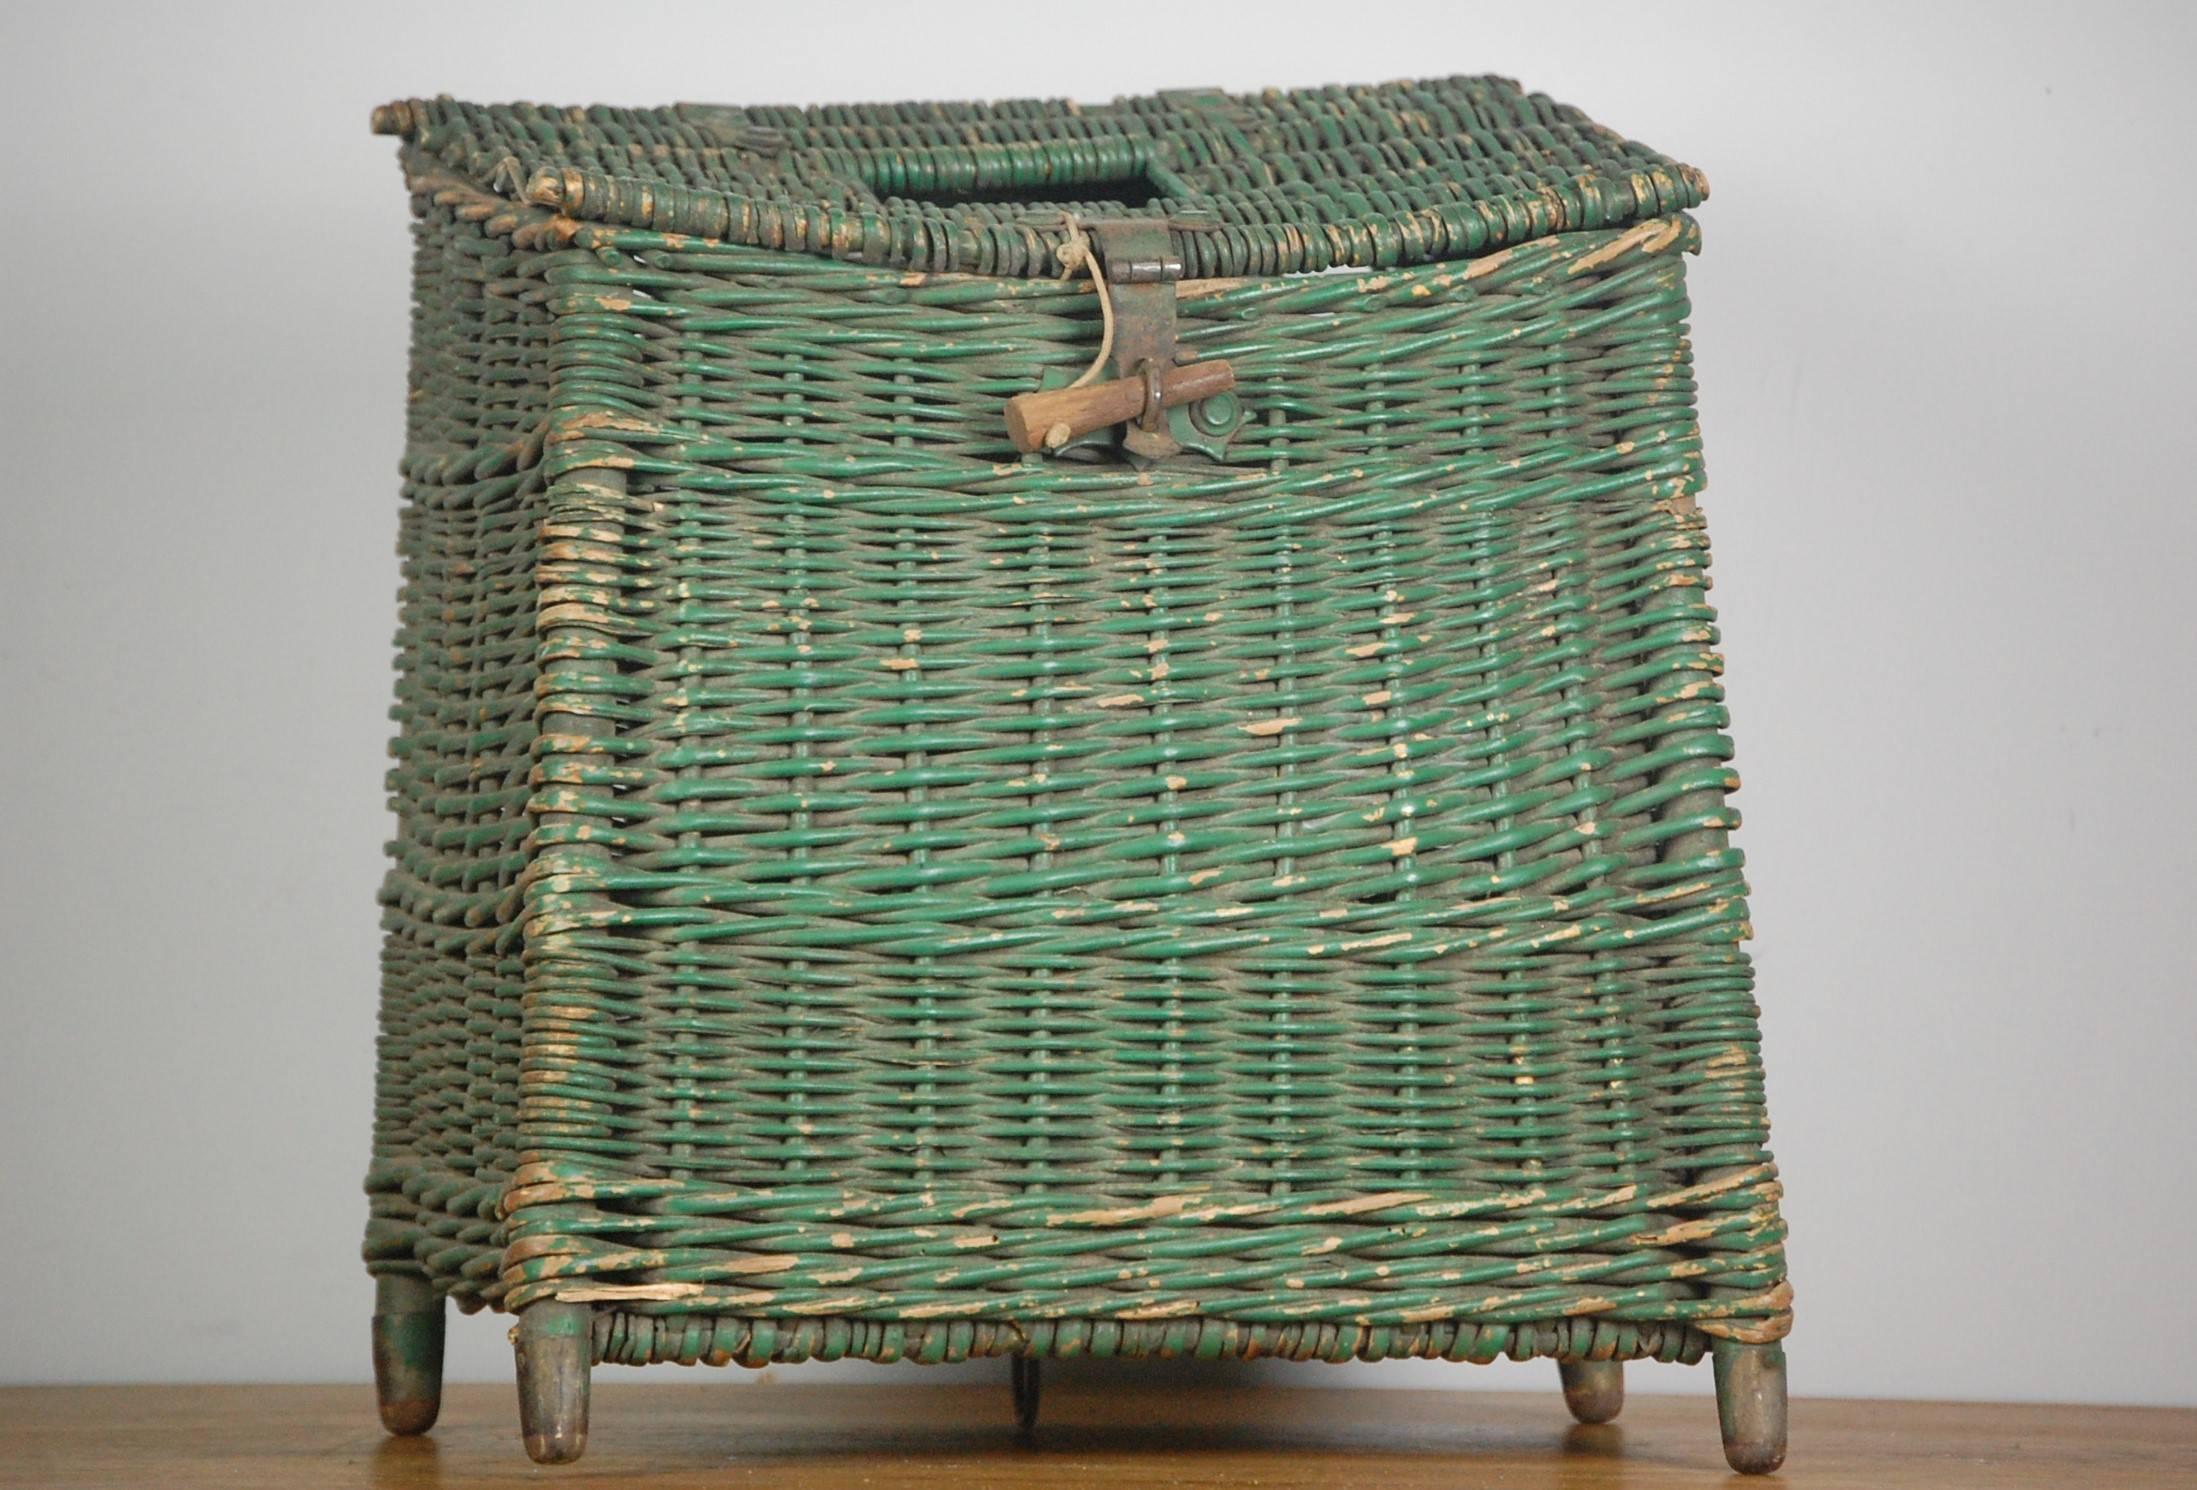 Watermelon wicker creels are rare and collectable - Thomas Turner Fishing  Antiques